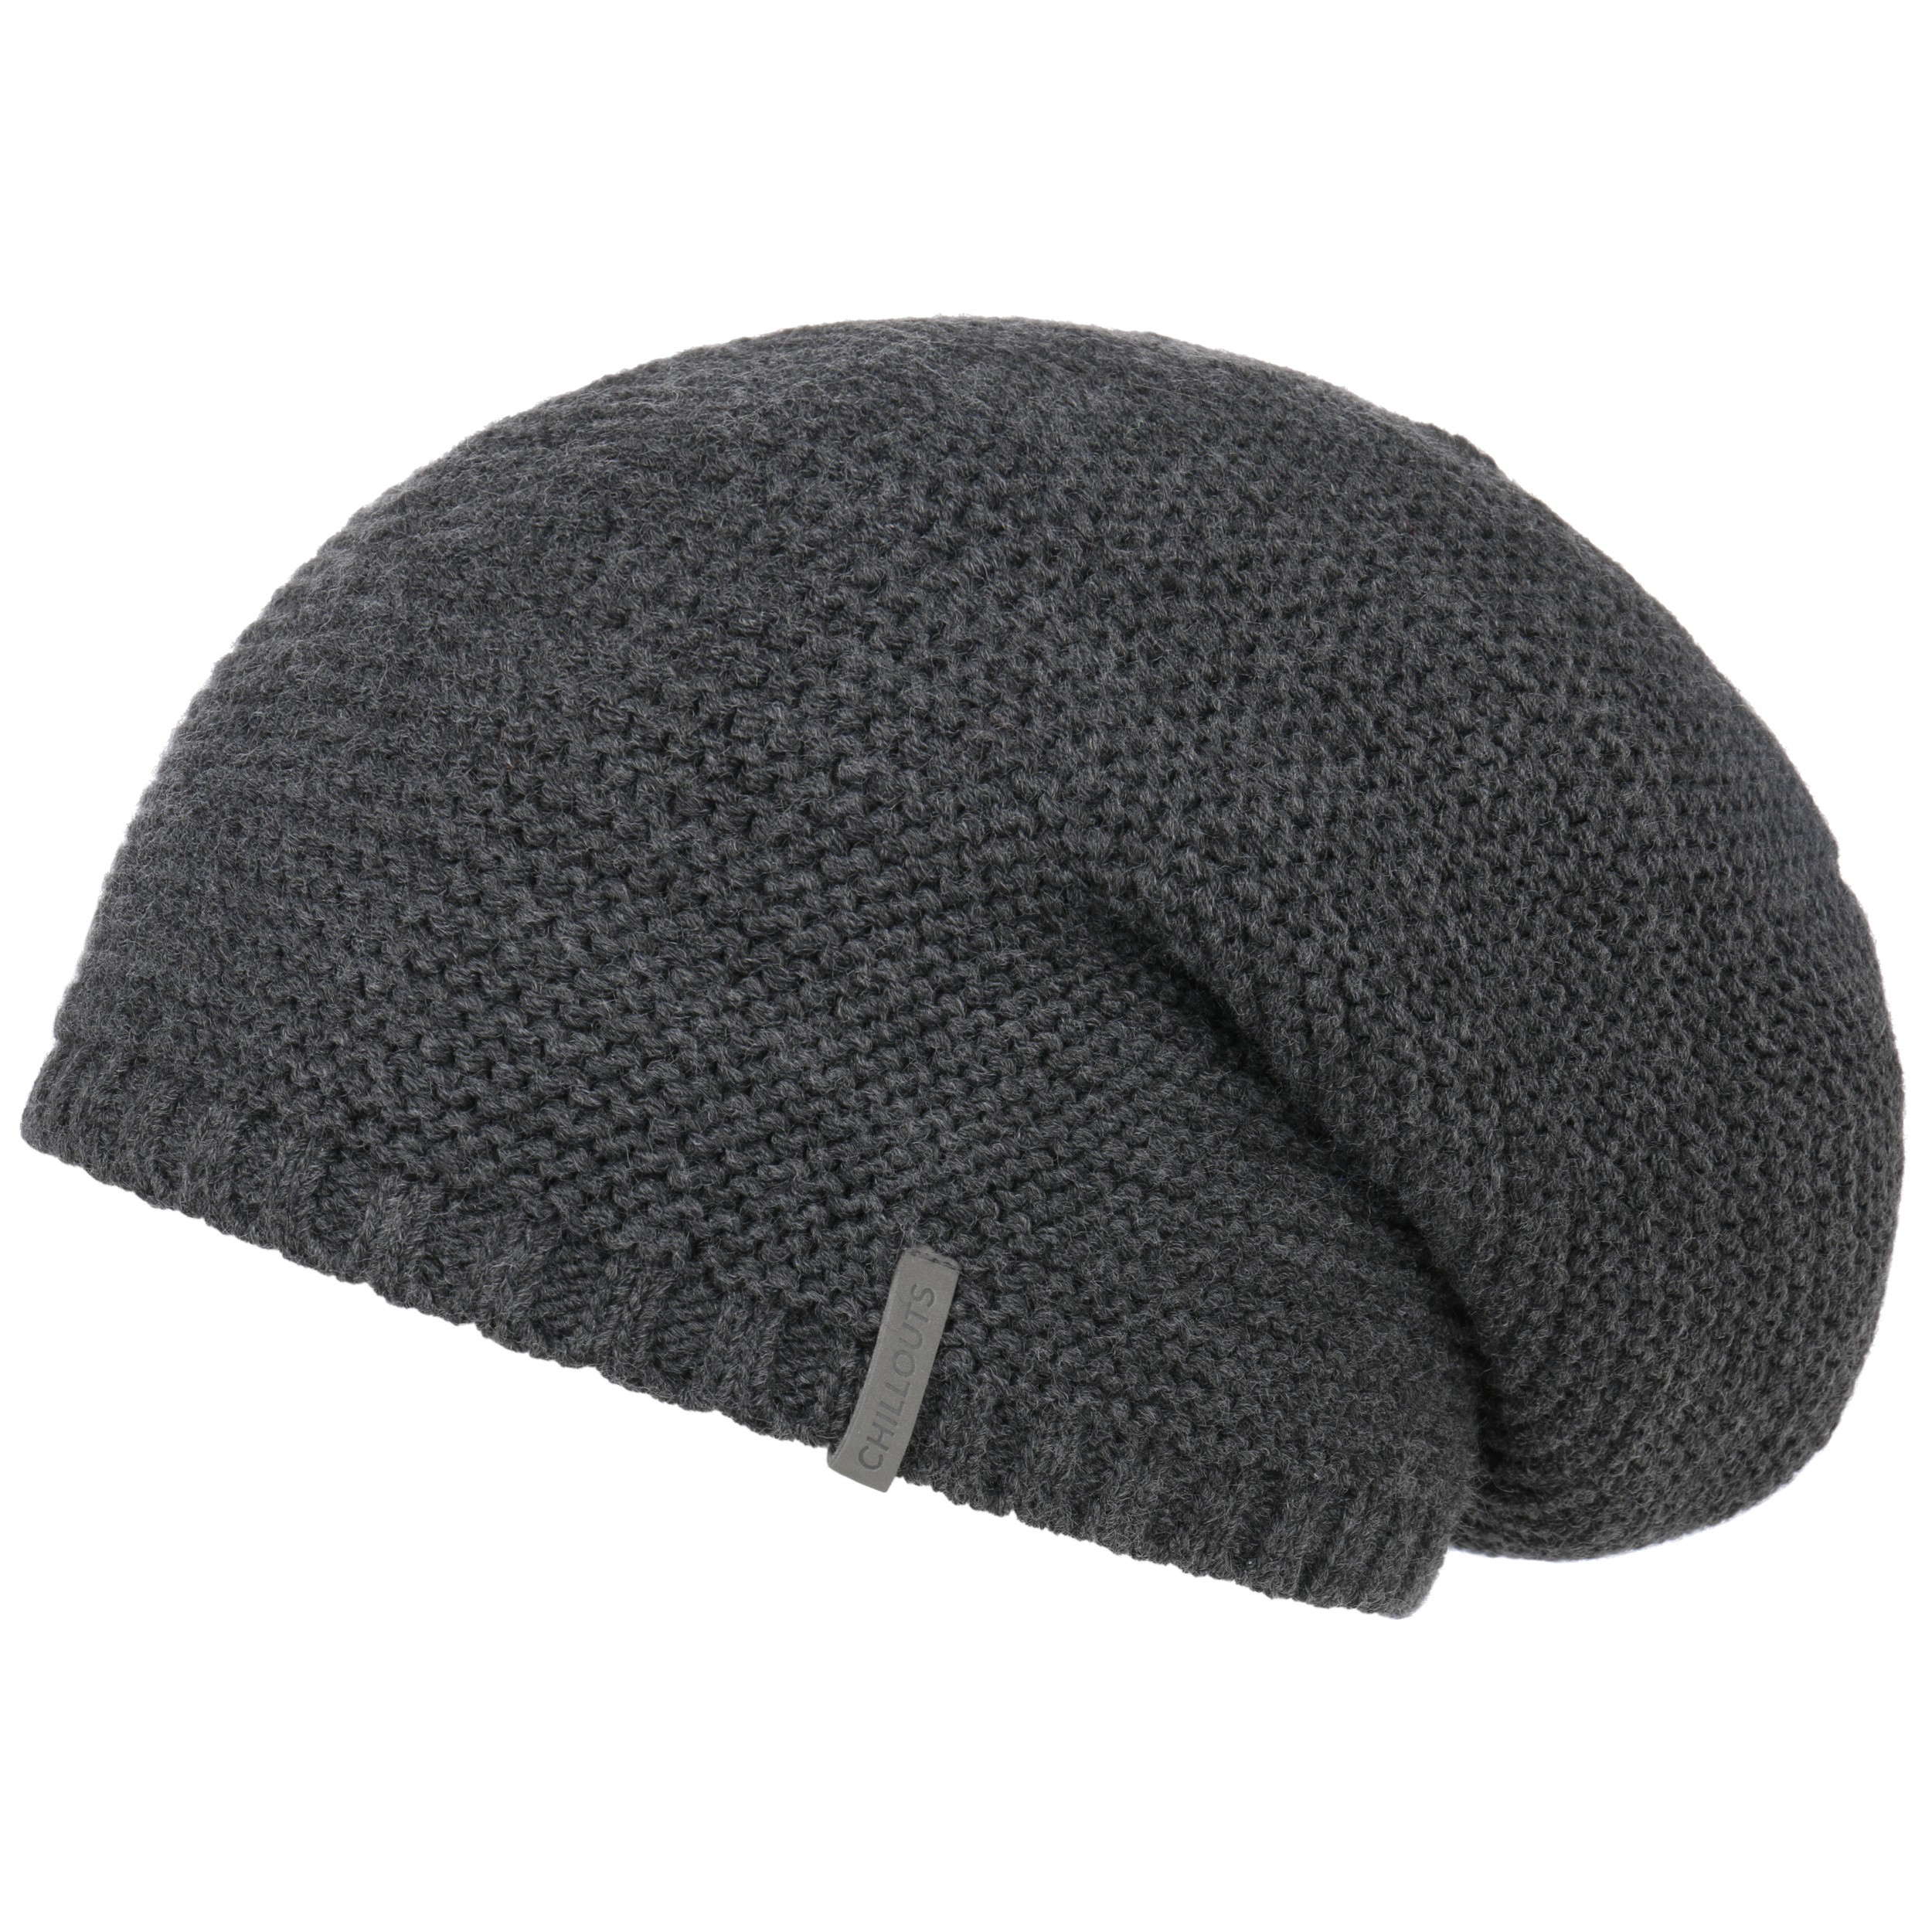 € by Beanie - 37,95 Hat Keith Chillouts